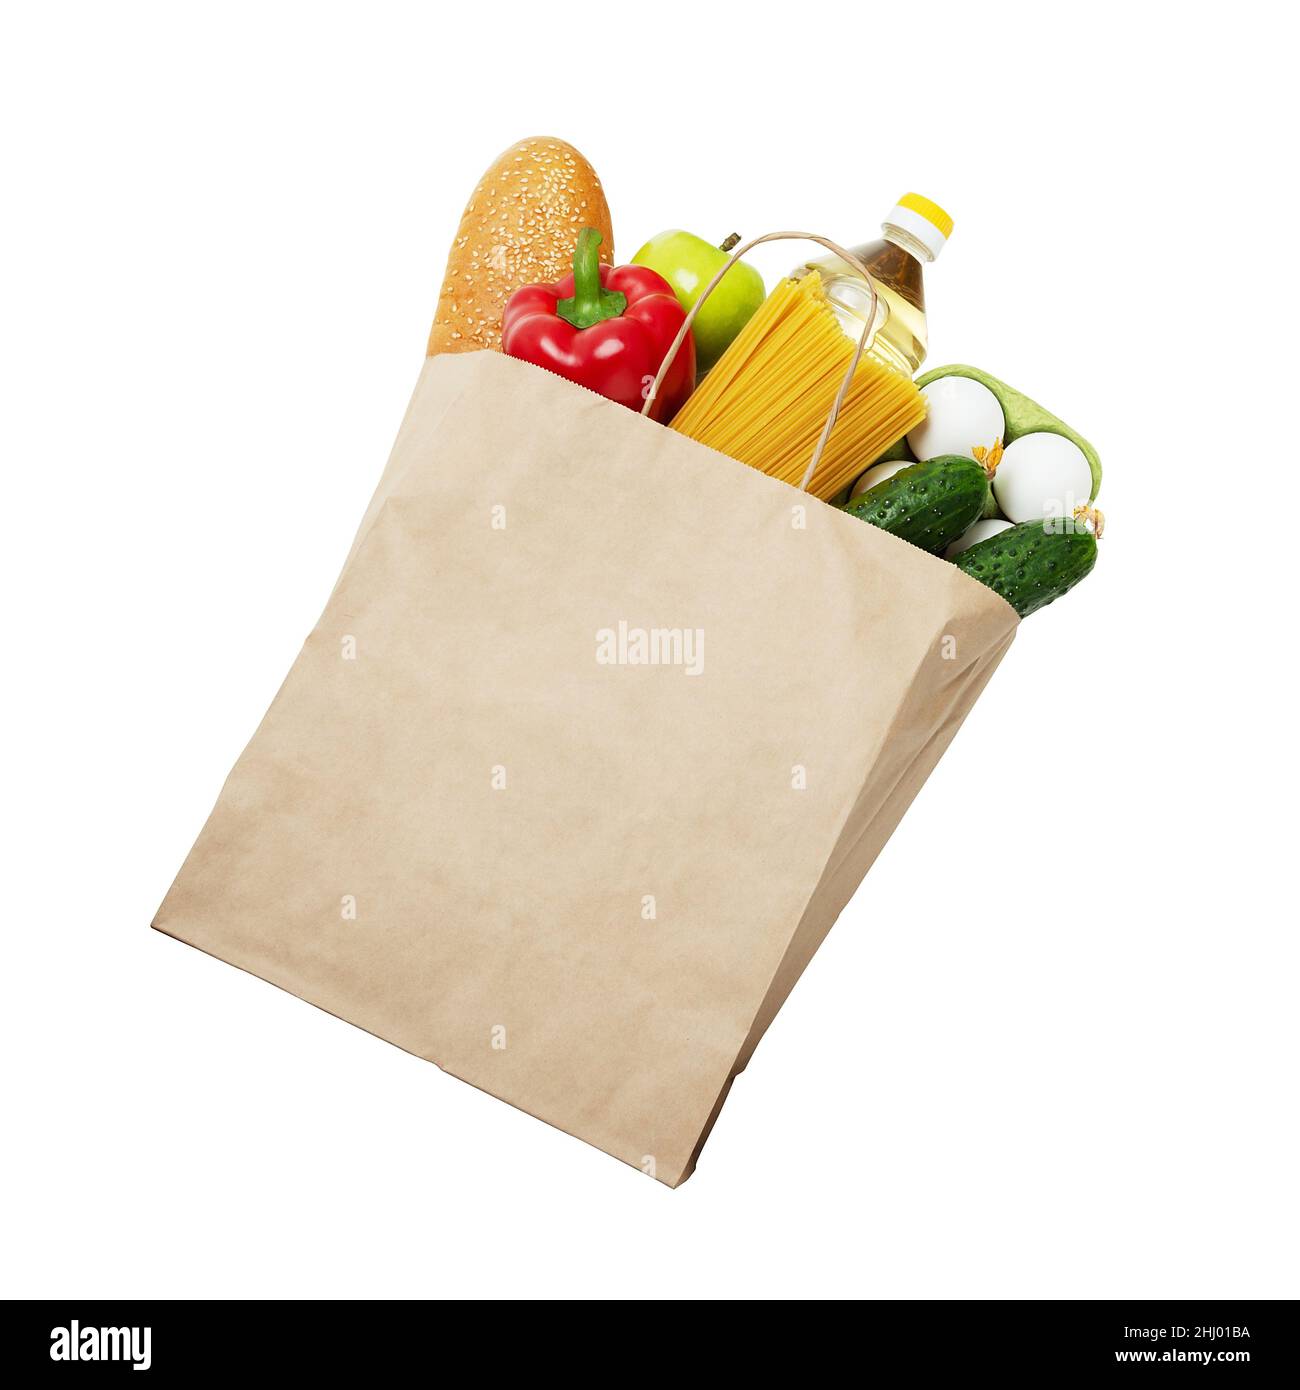 Healthy nutrition in mock up paper bag isolated on white background. Concept of Zero waste, eco-friendly shopping, food donation, food delivery.  Stock Photo